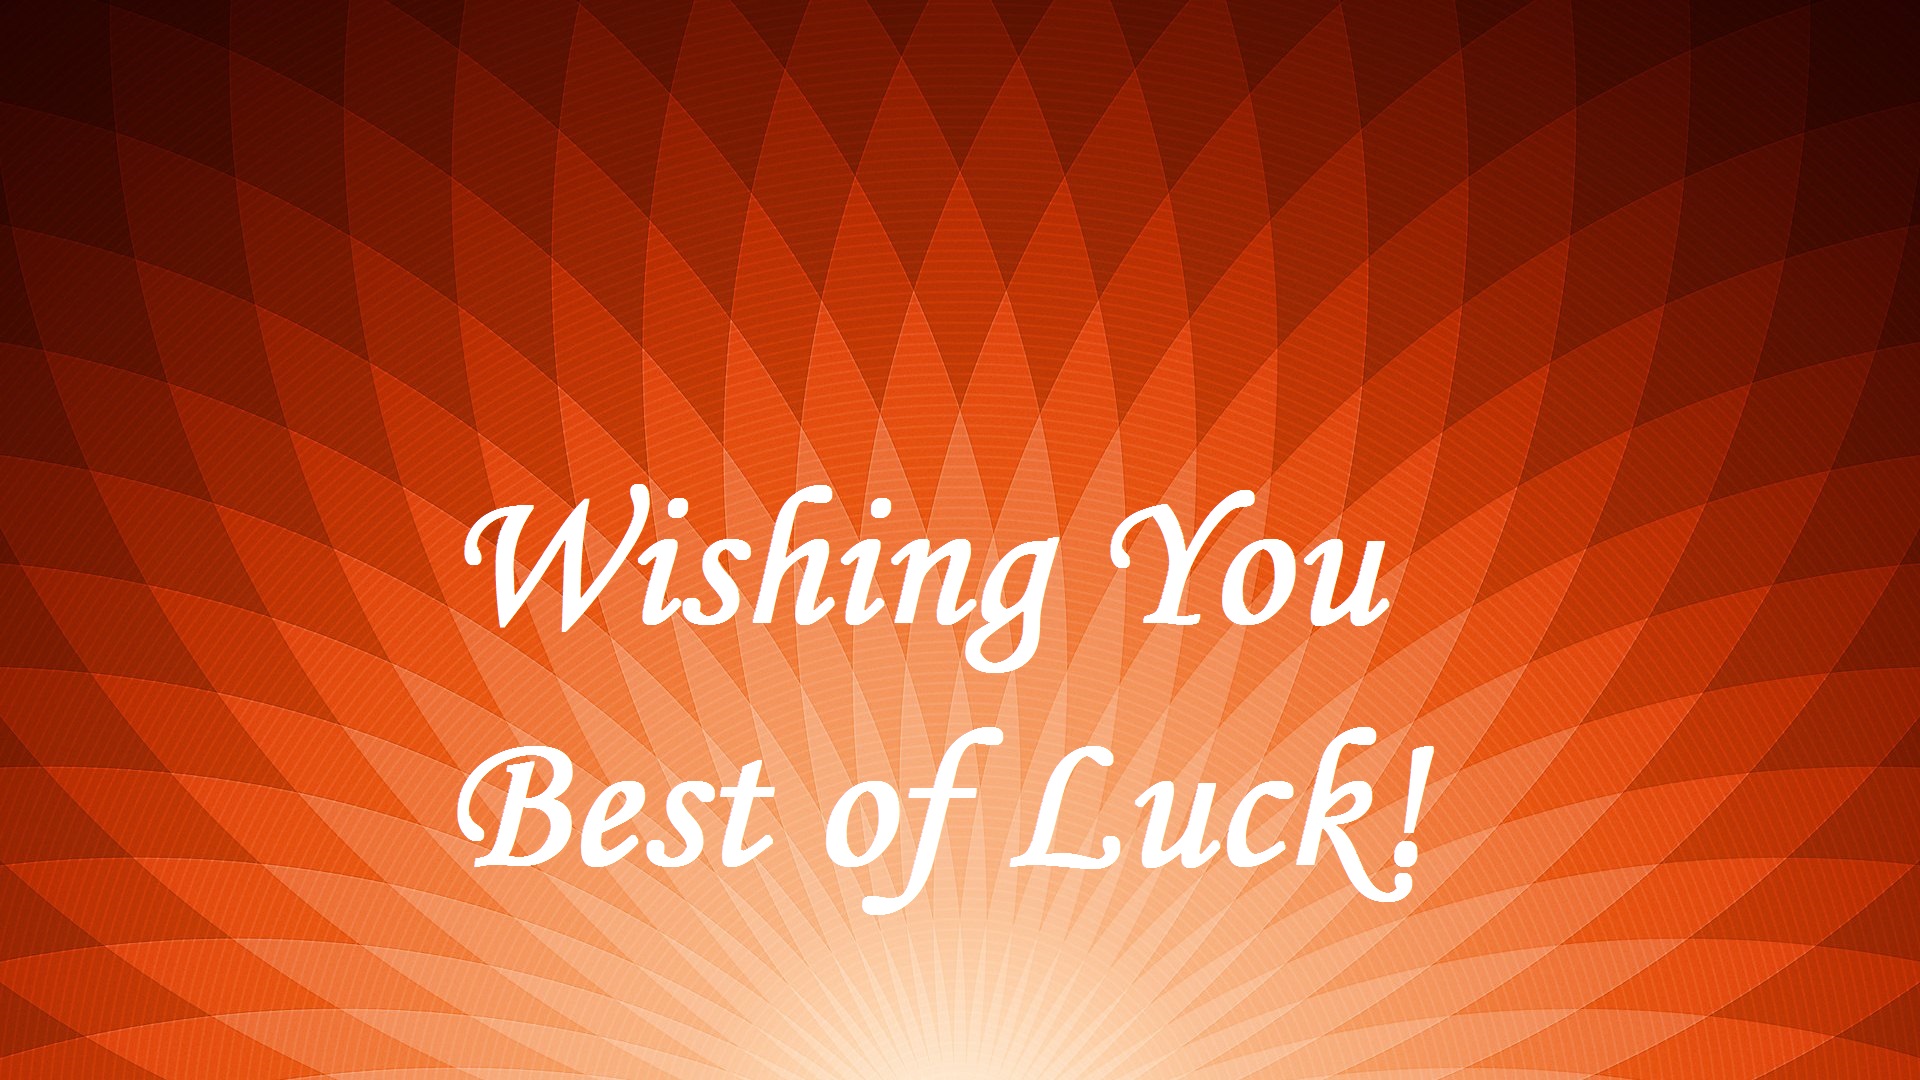 best of luck image hd